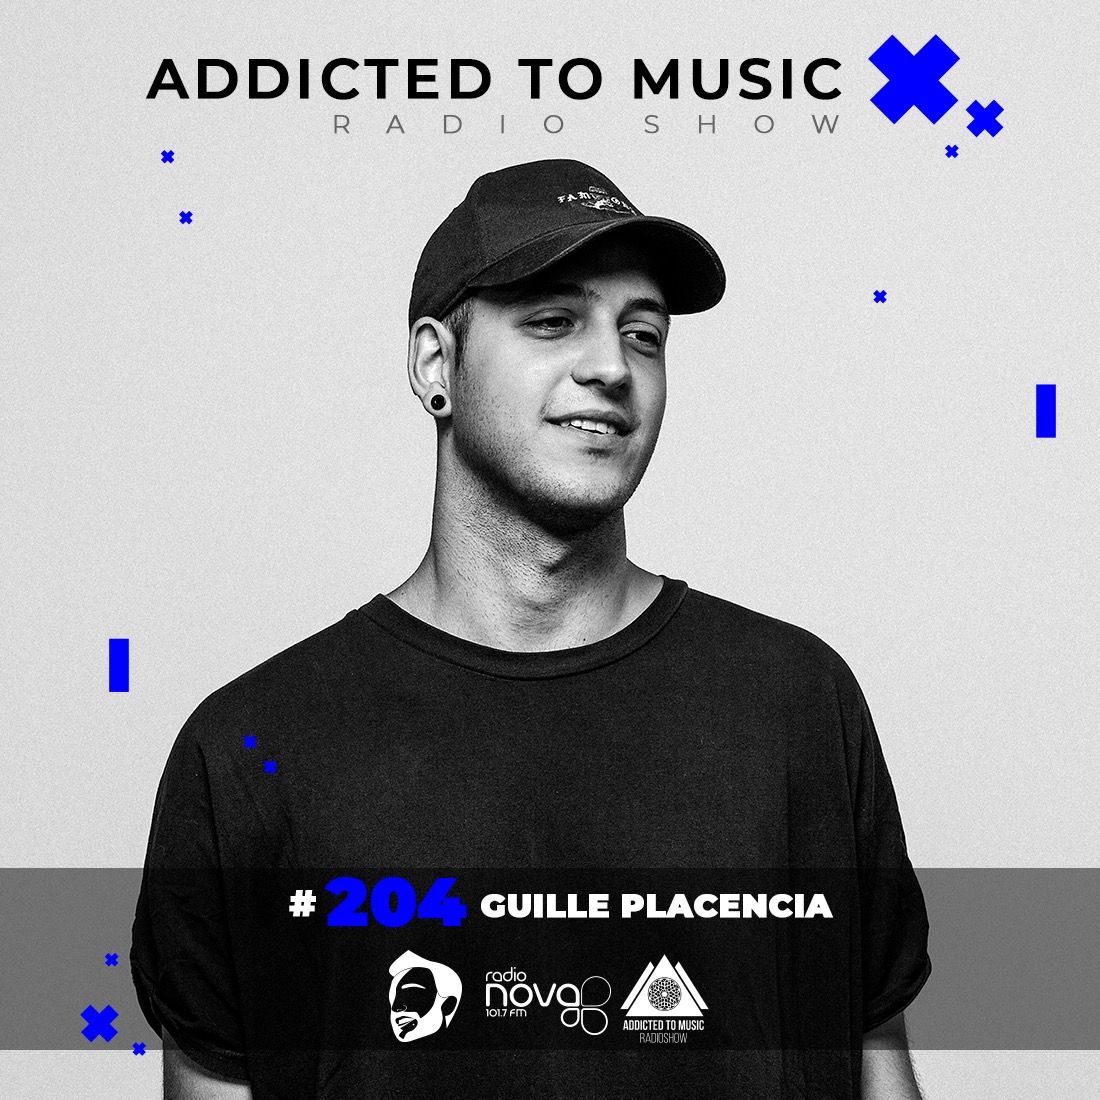 Guille Placencia - World Up Radio Show #204